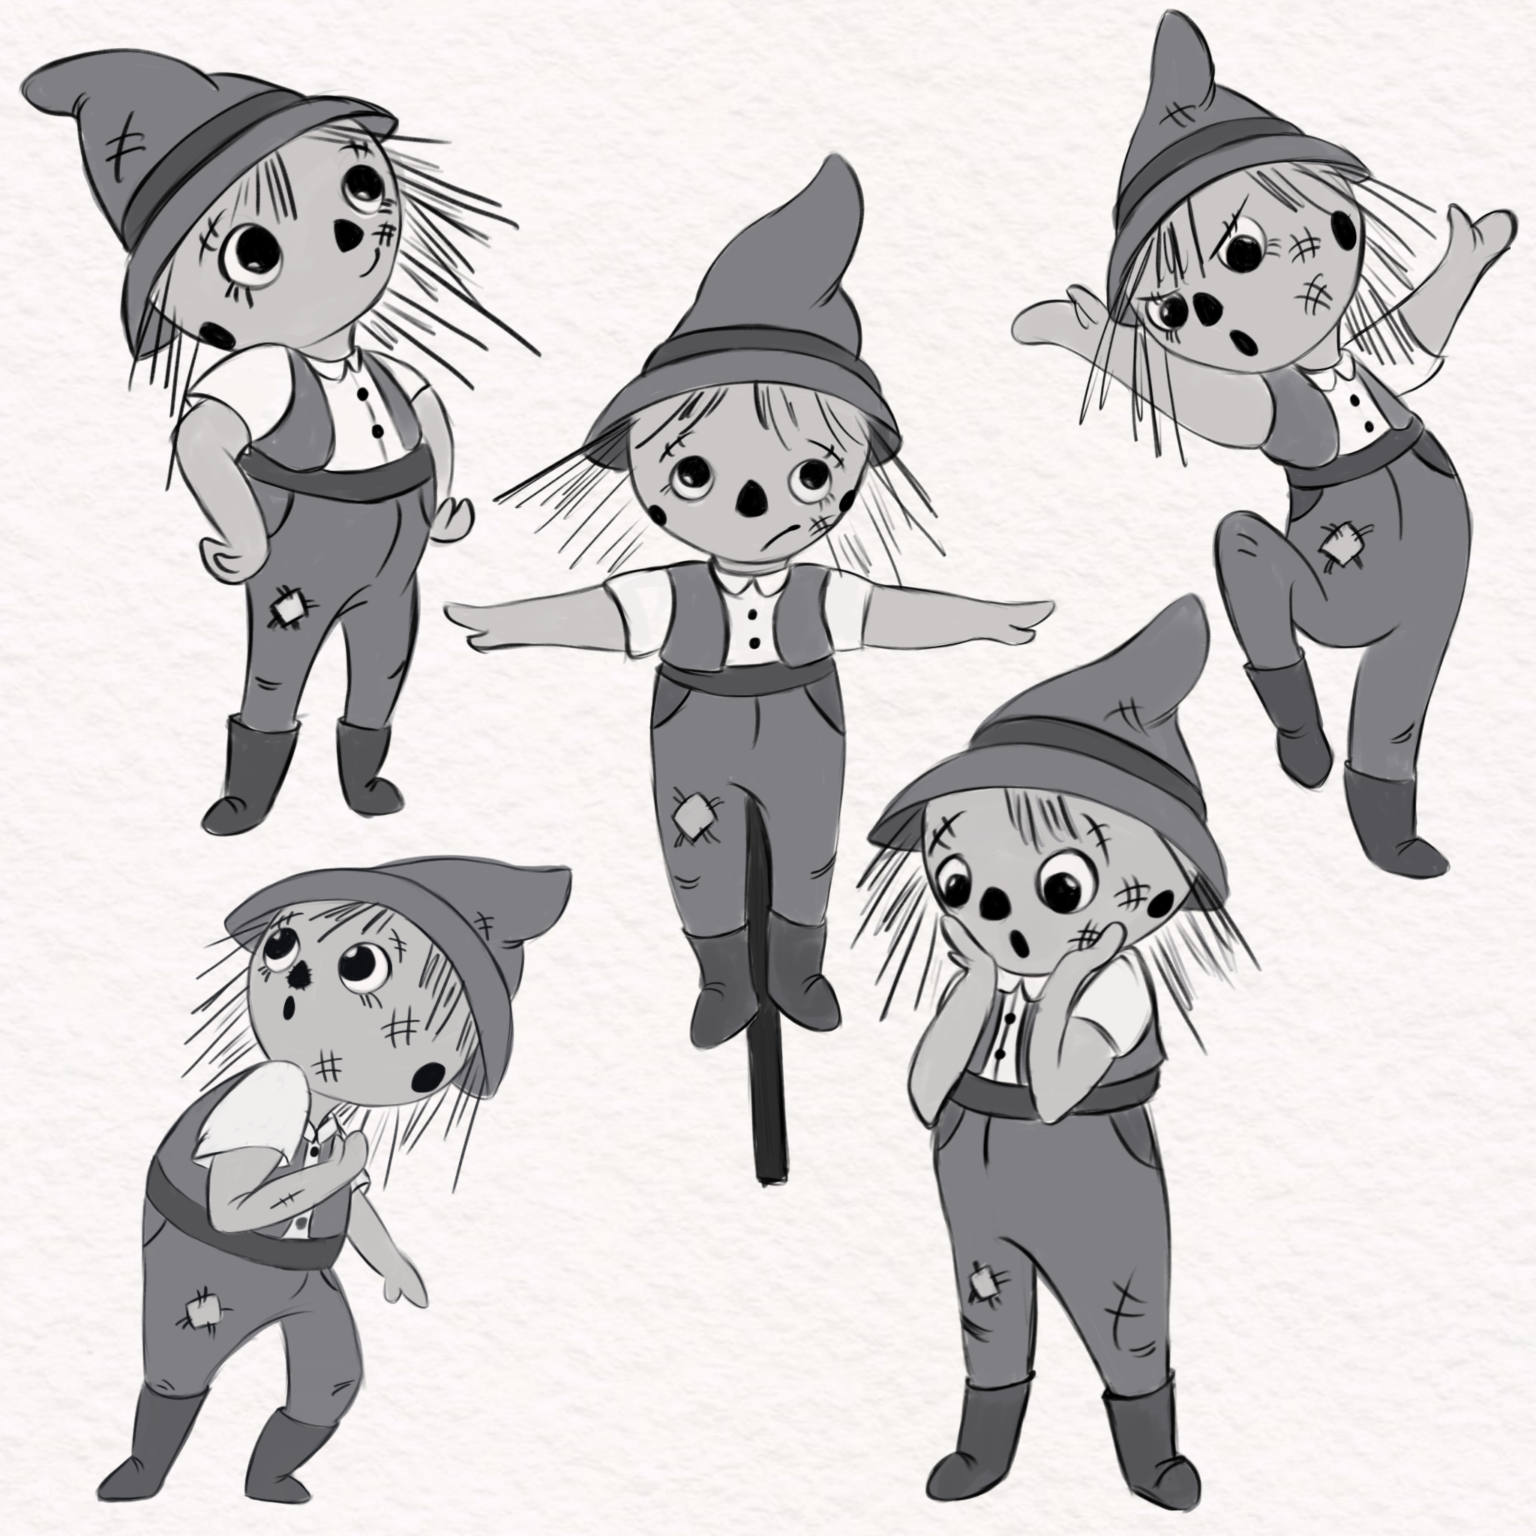 wizard of oz character design